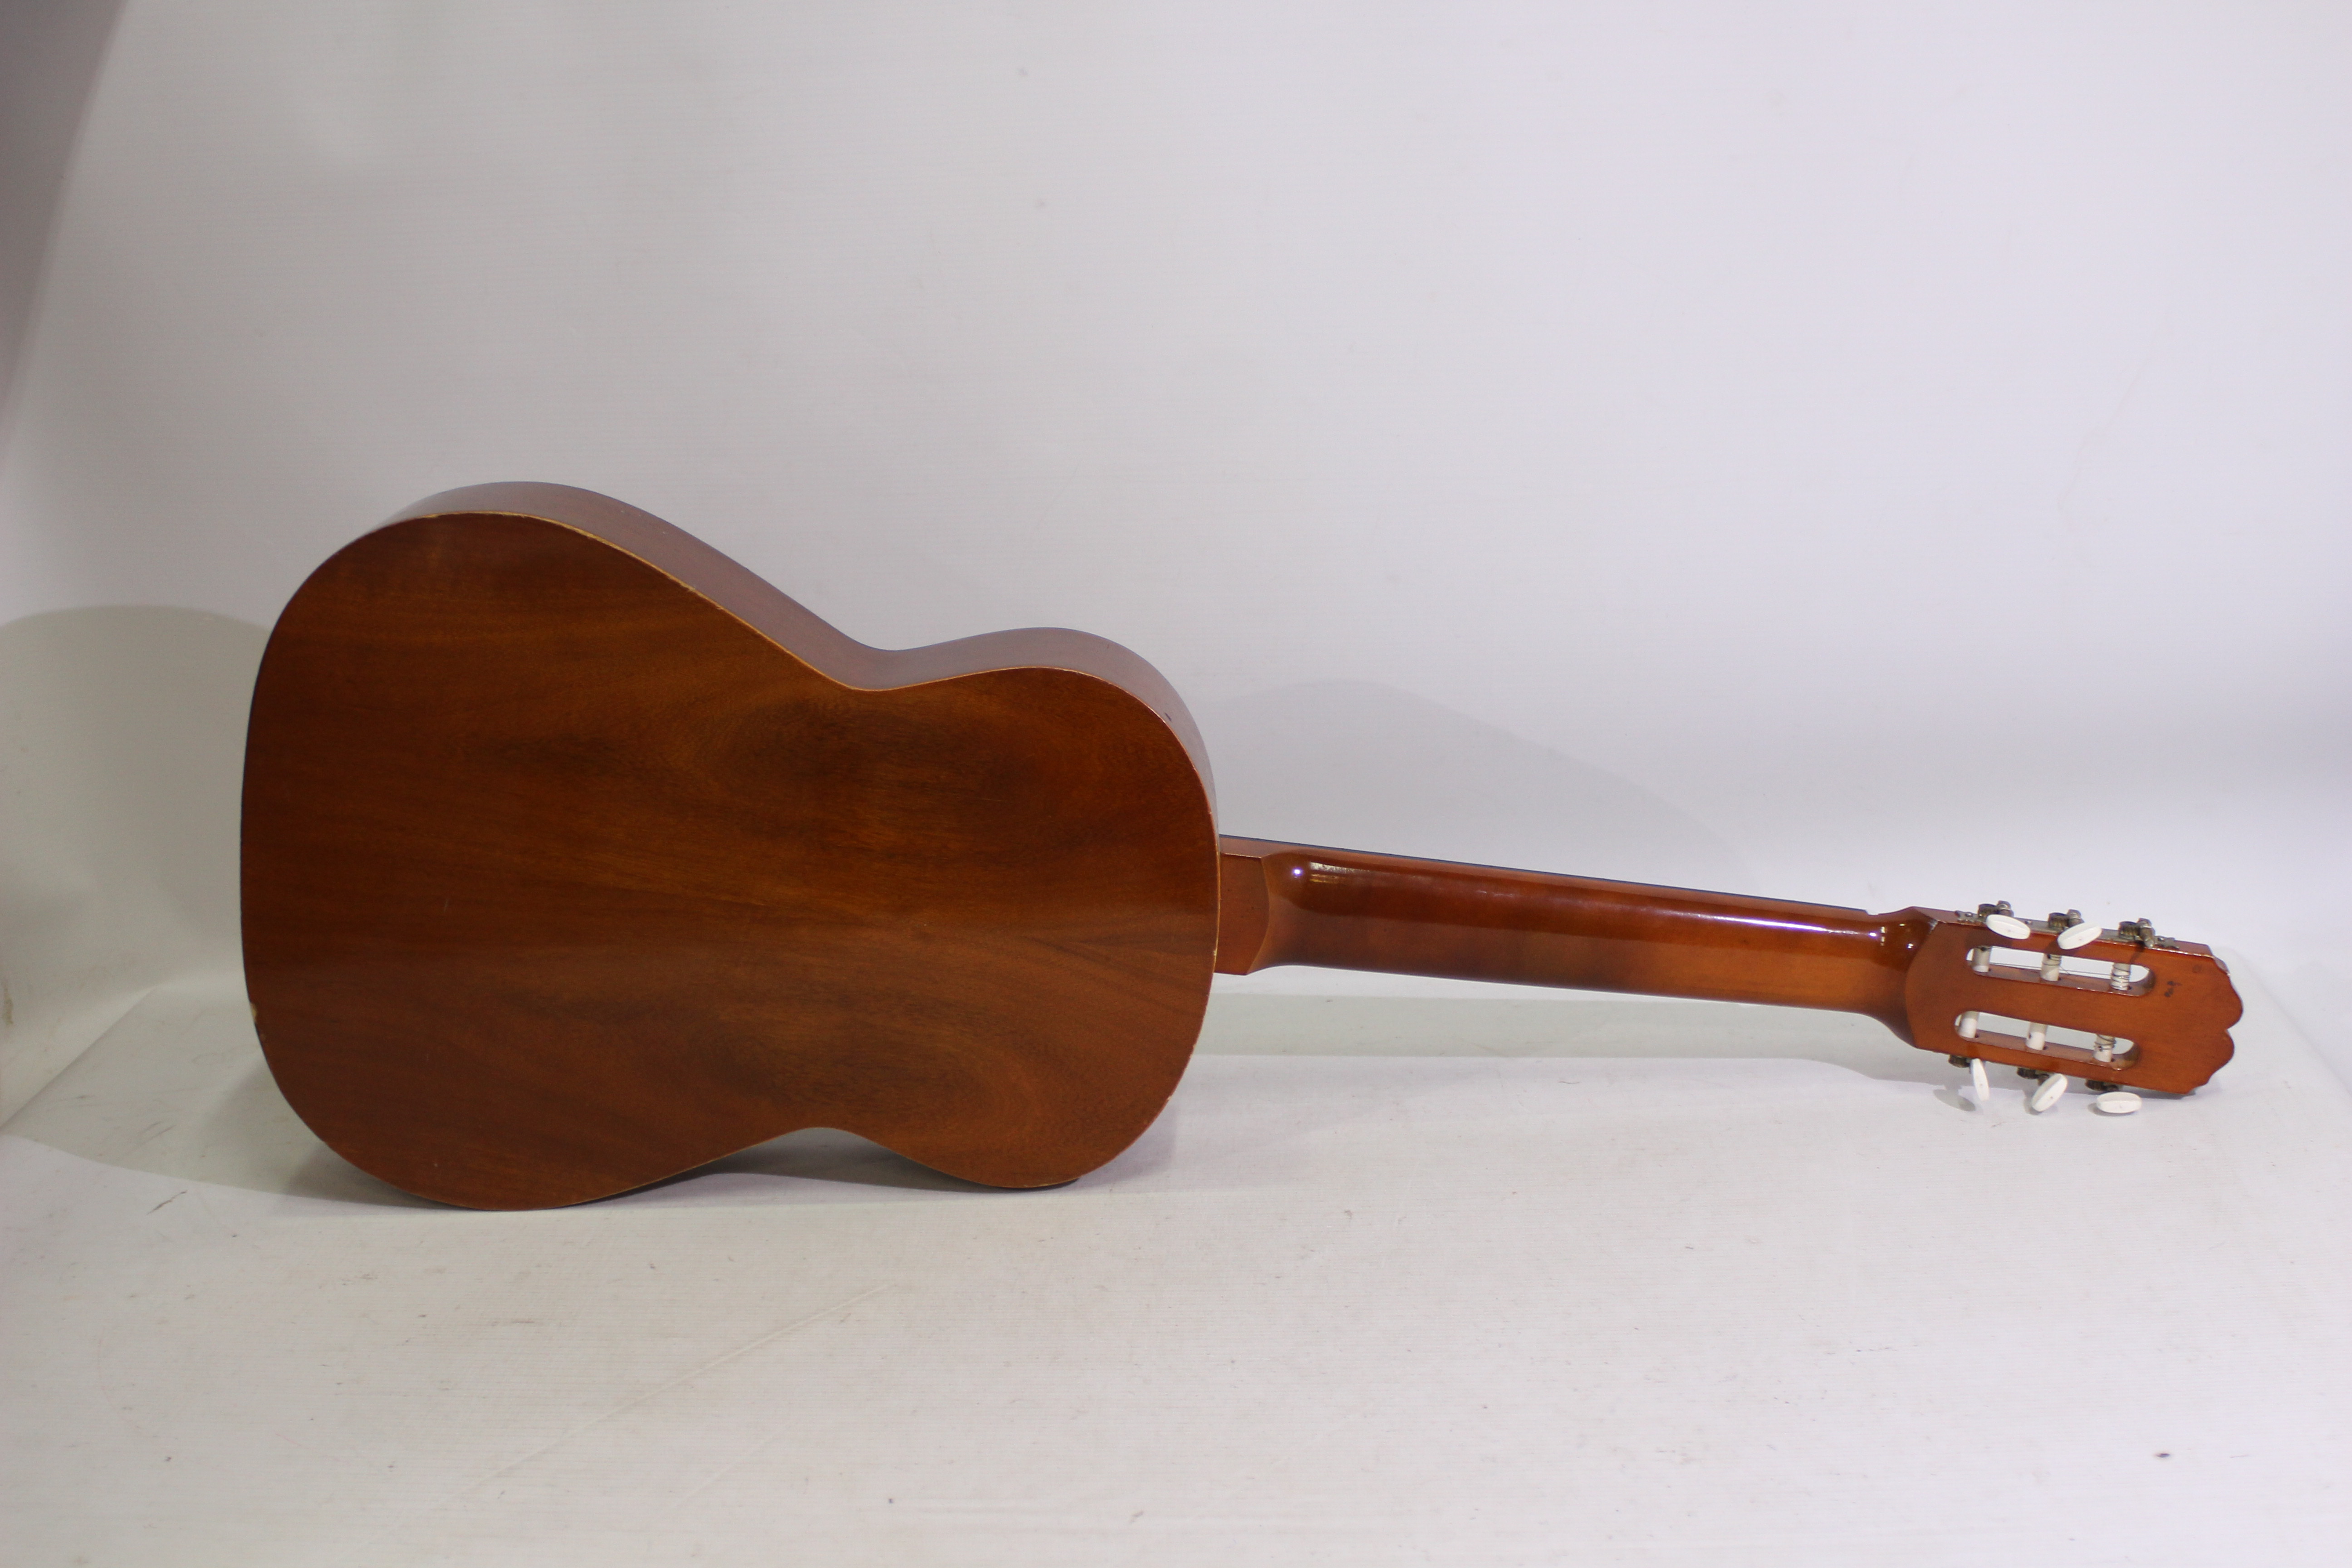 A BM Clasico Spanish made acoustic guitar. Appears in good condition. - Image 4 of 4